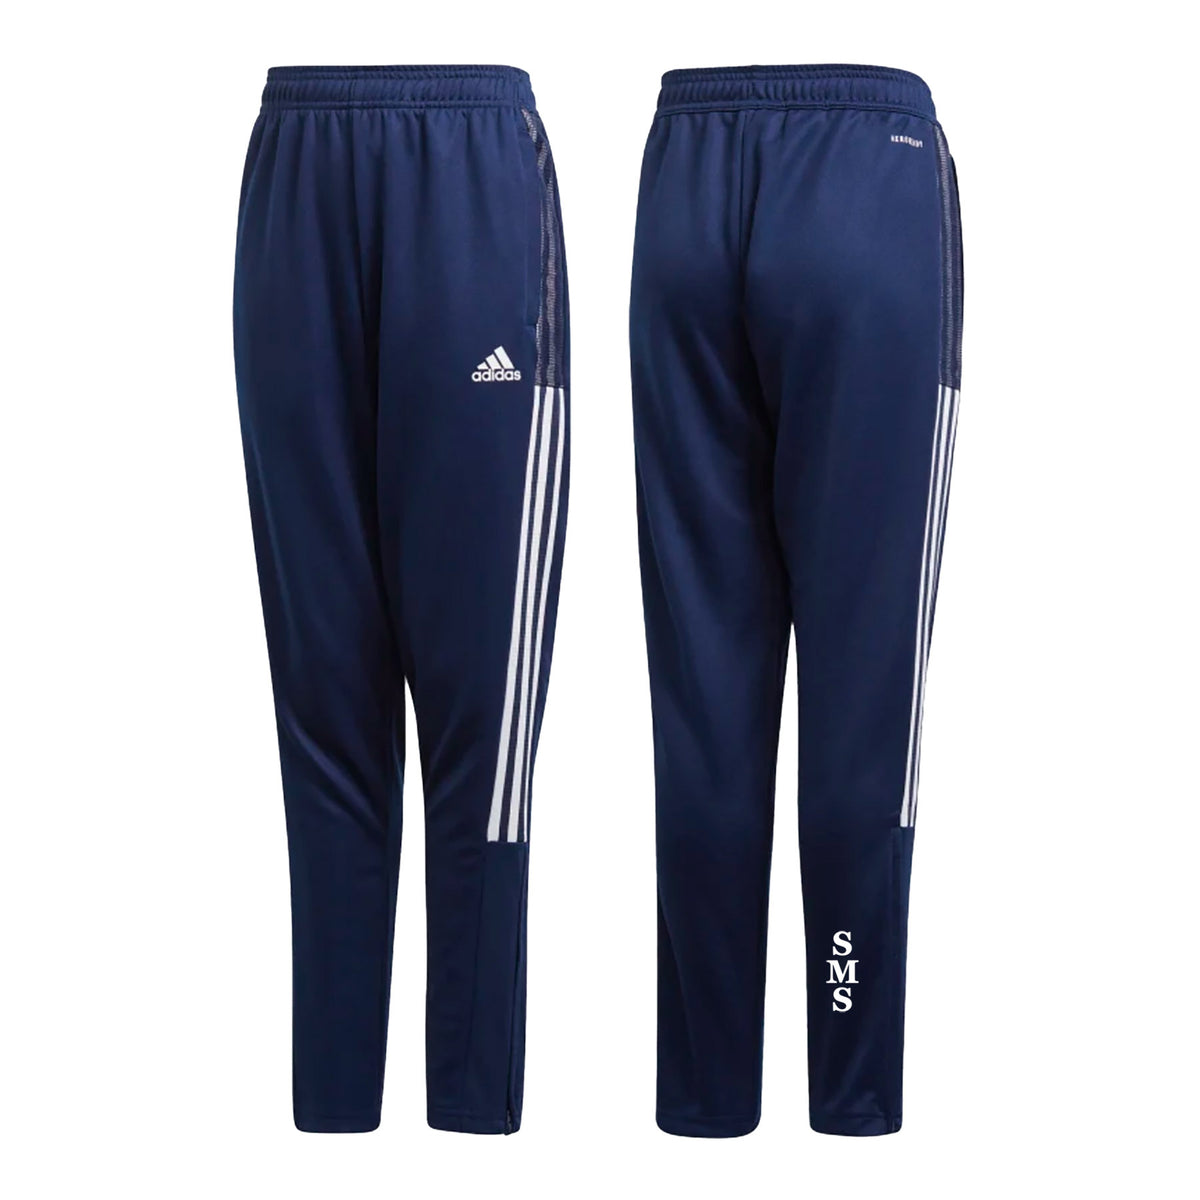 SMS ADIDAS TRACK PANTS, YOUTH